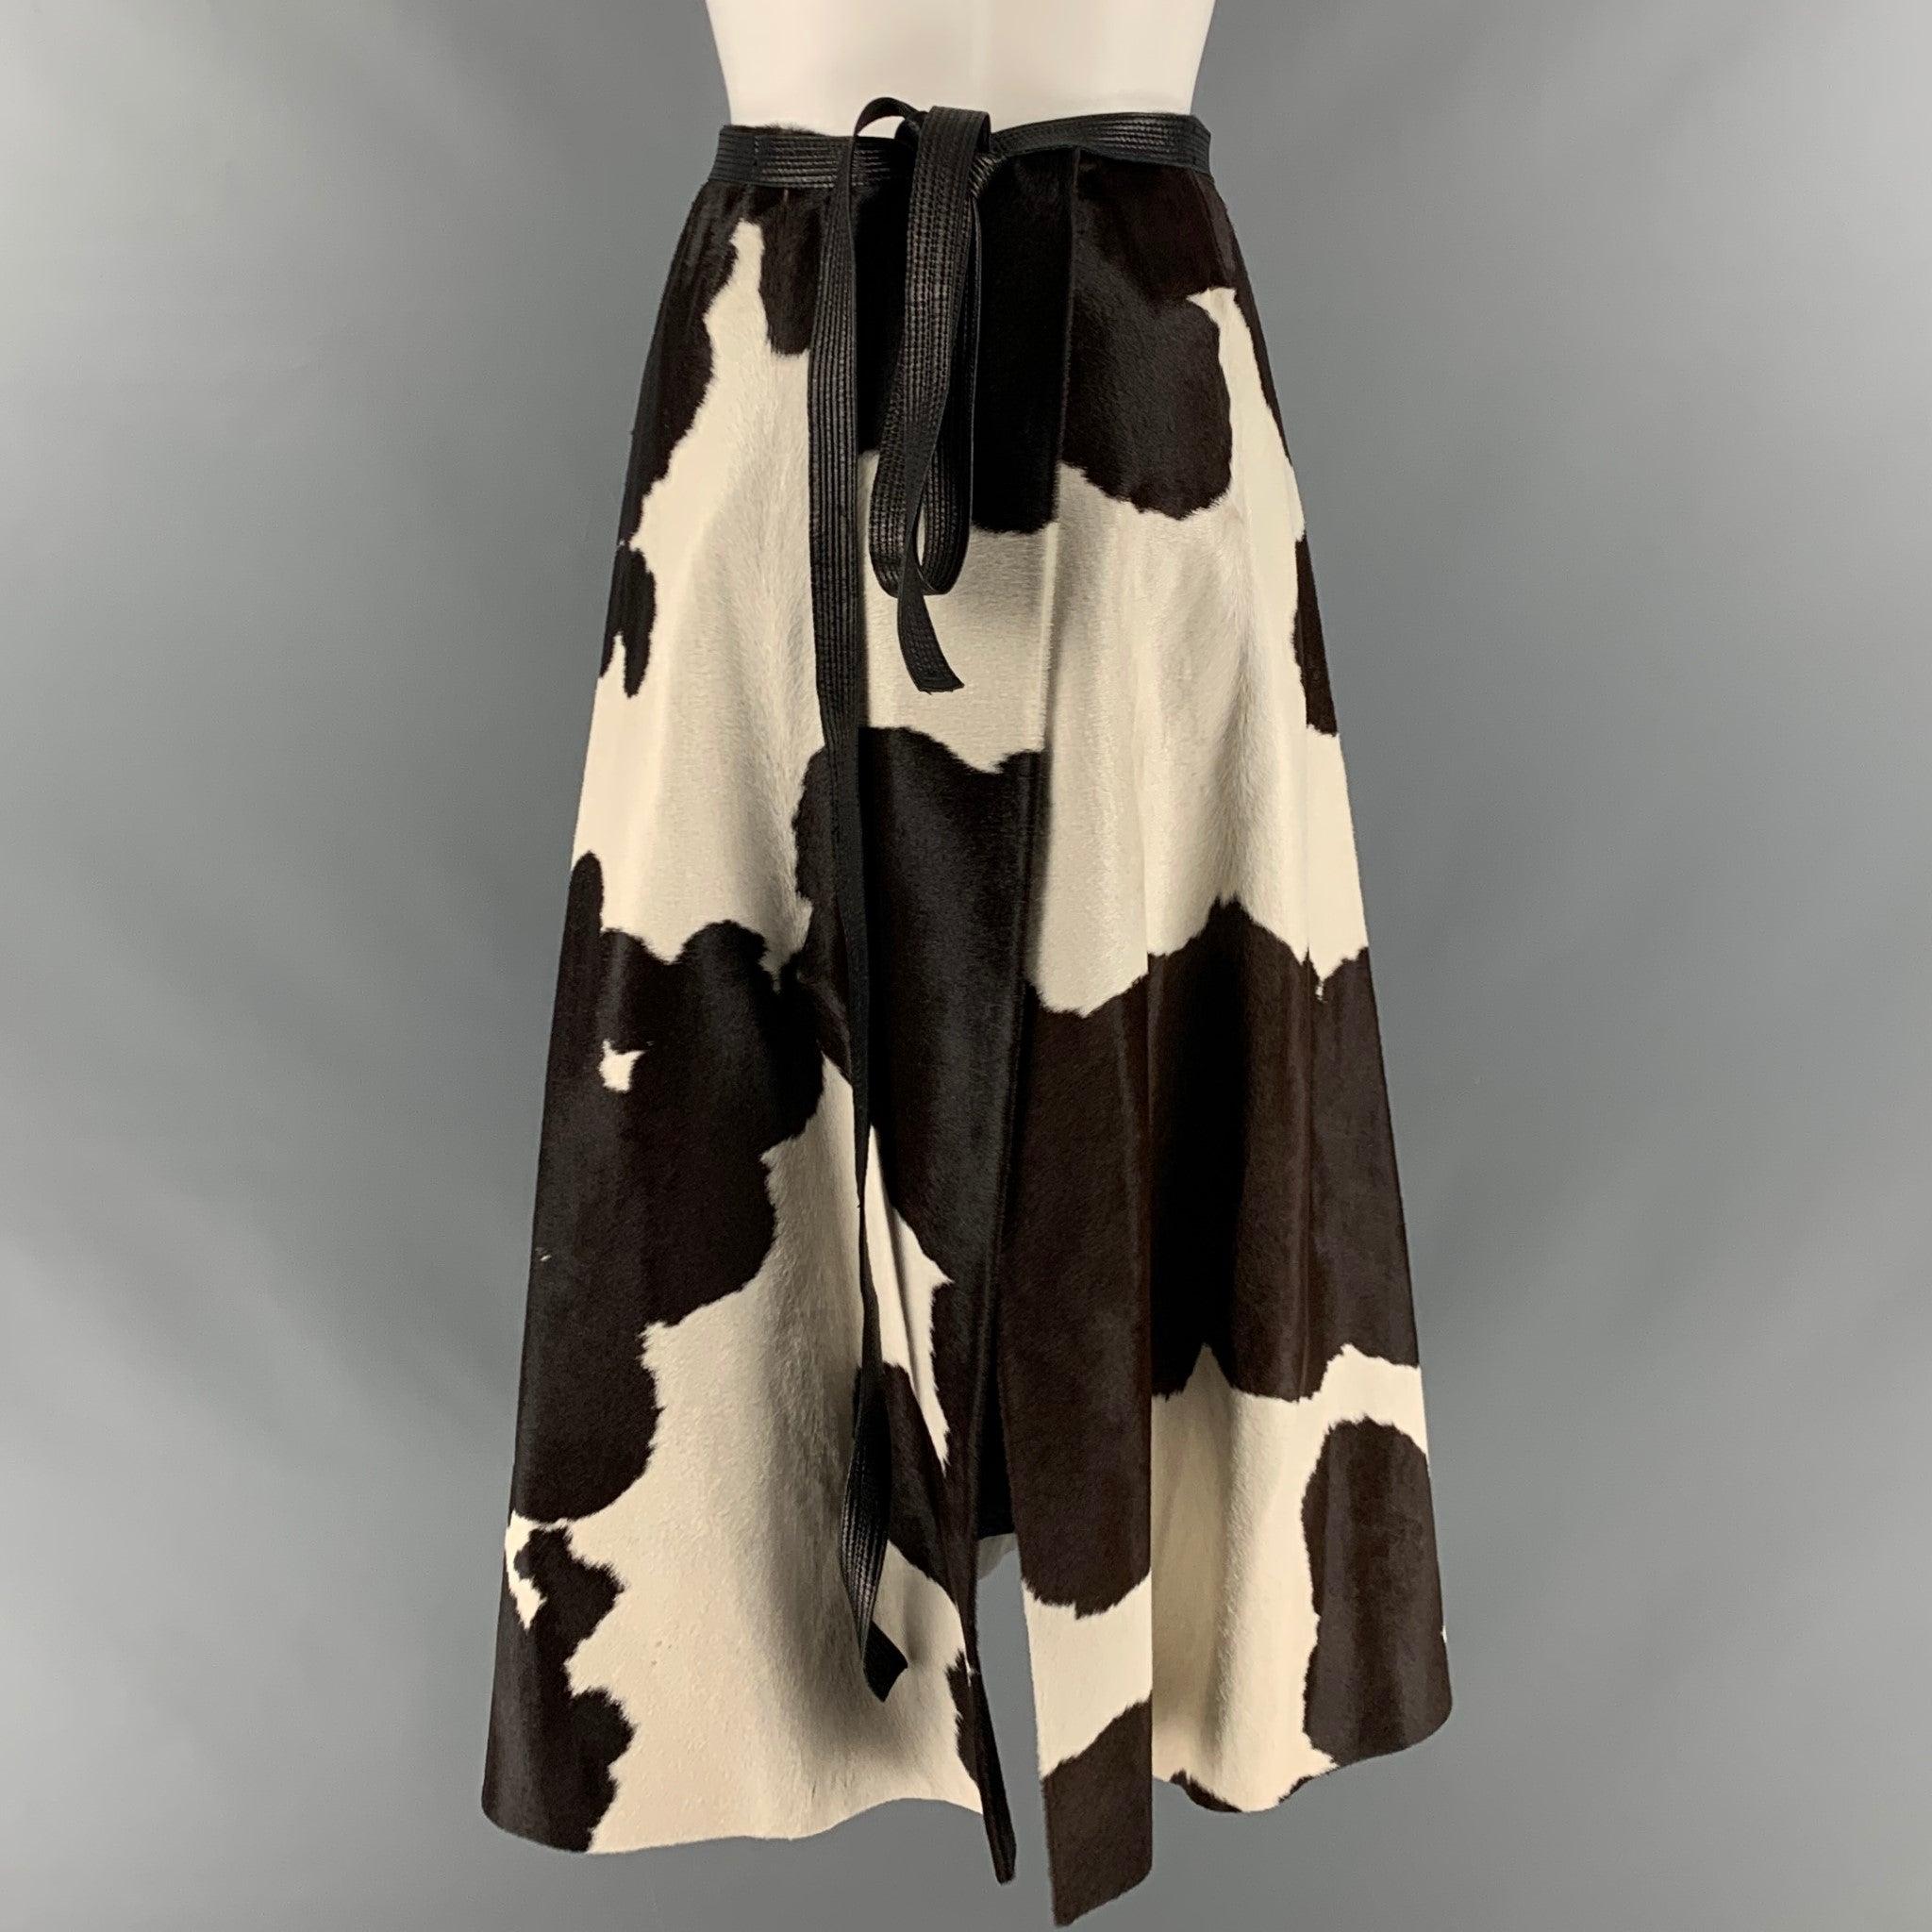 MARC JACOBS Size 6 Brown Cream Calf hair Wrap Skirt In Good Condition For Sale In San Francisco, CA